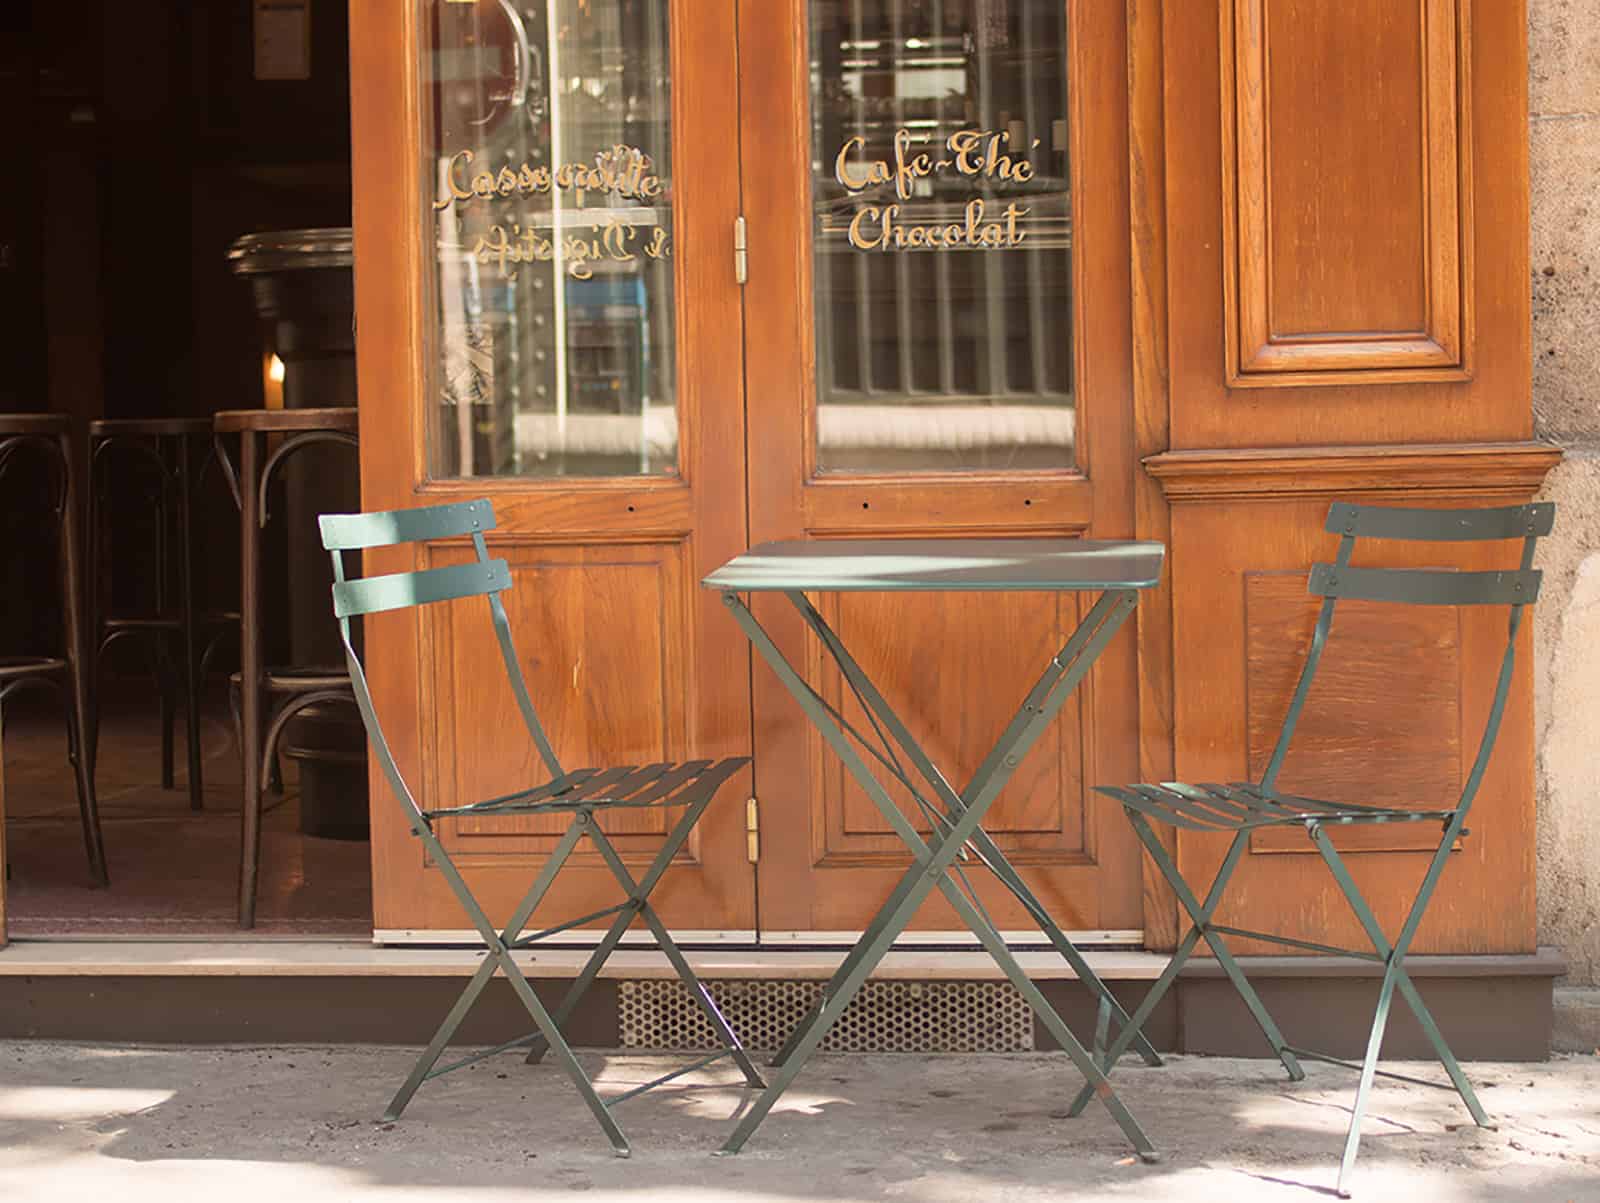 The Five Best Apps for Food-Lovers in Paris will help you find great local coffee shops like Papilles here with its outdoor seating in the sunshine.